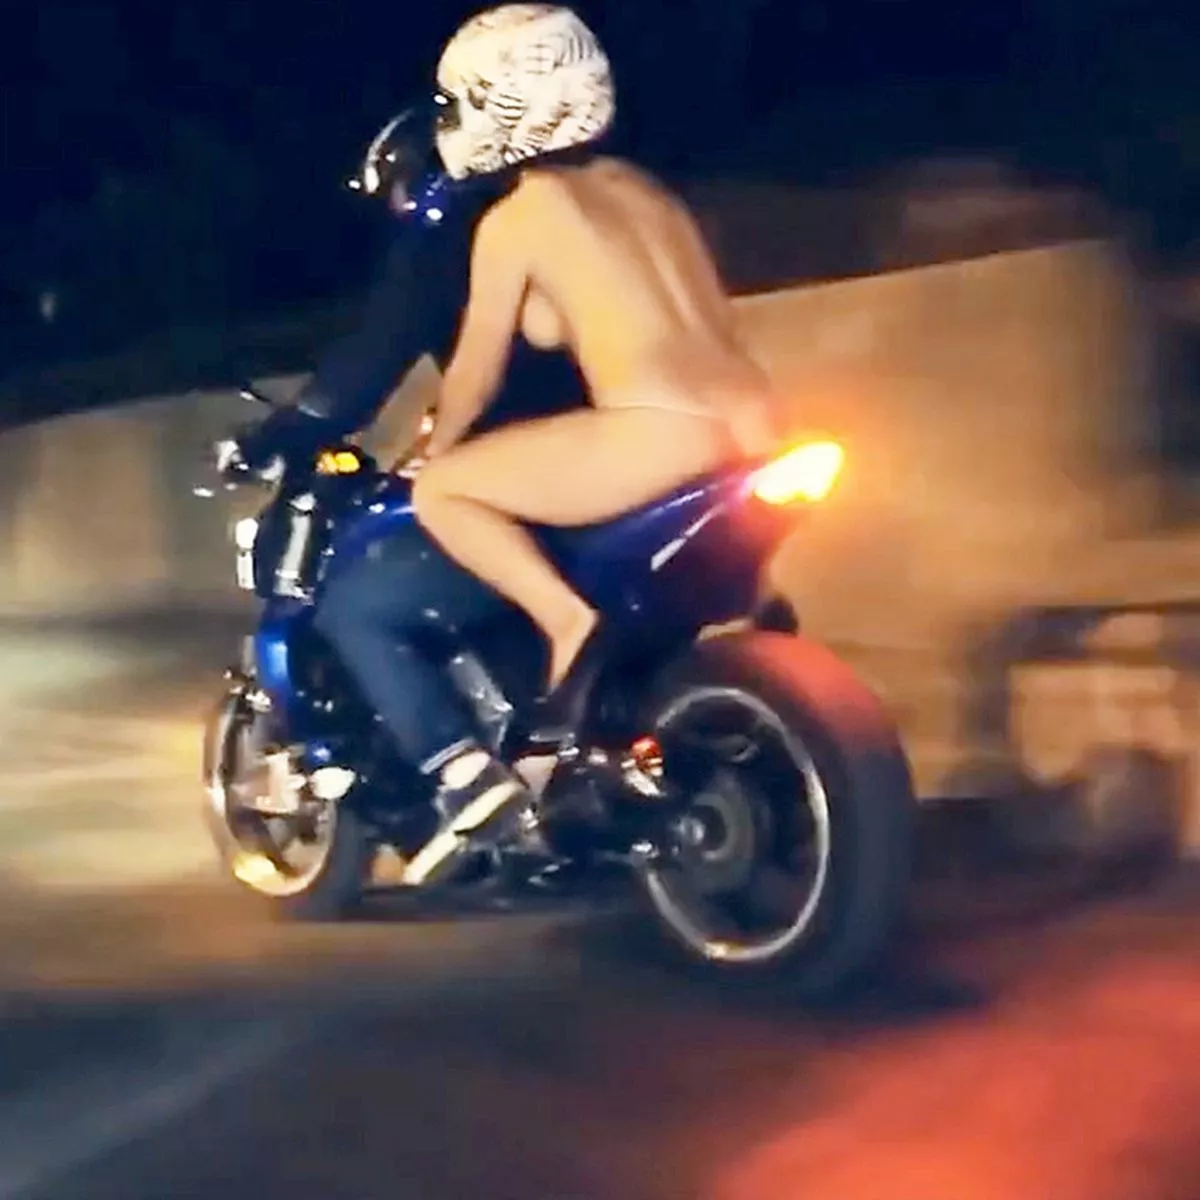 barbara markland recommends naked ladies on motorbikes pic